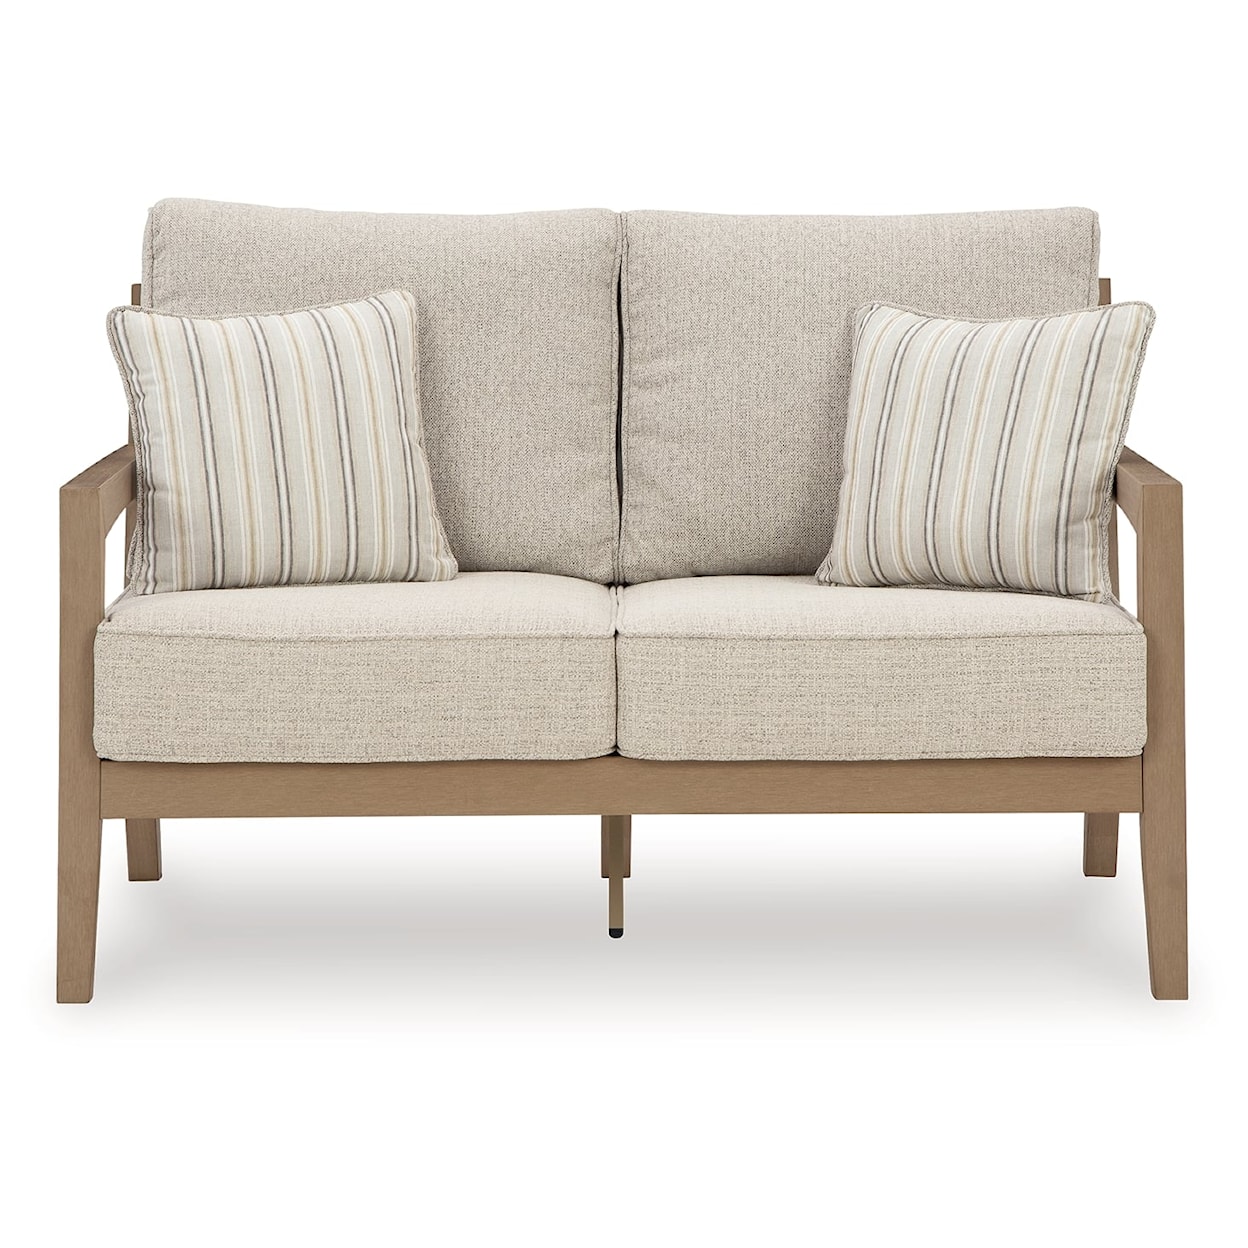 Signature Design by Ashley Hallow Creek Outdoor Loveseat with Cushion